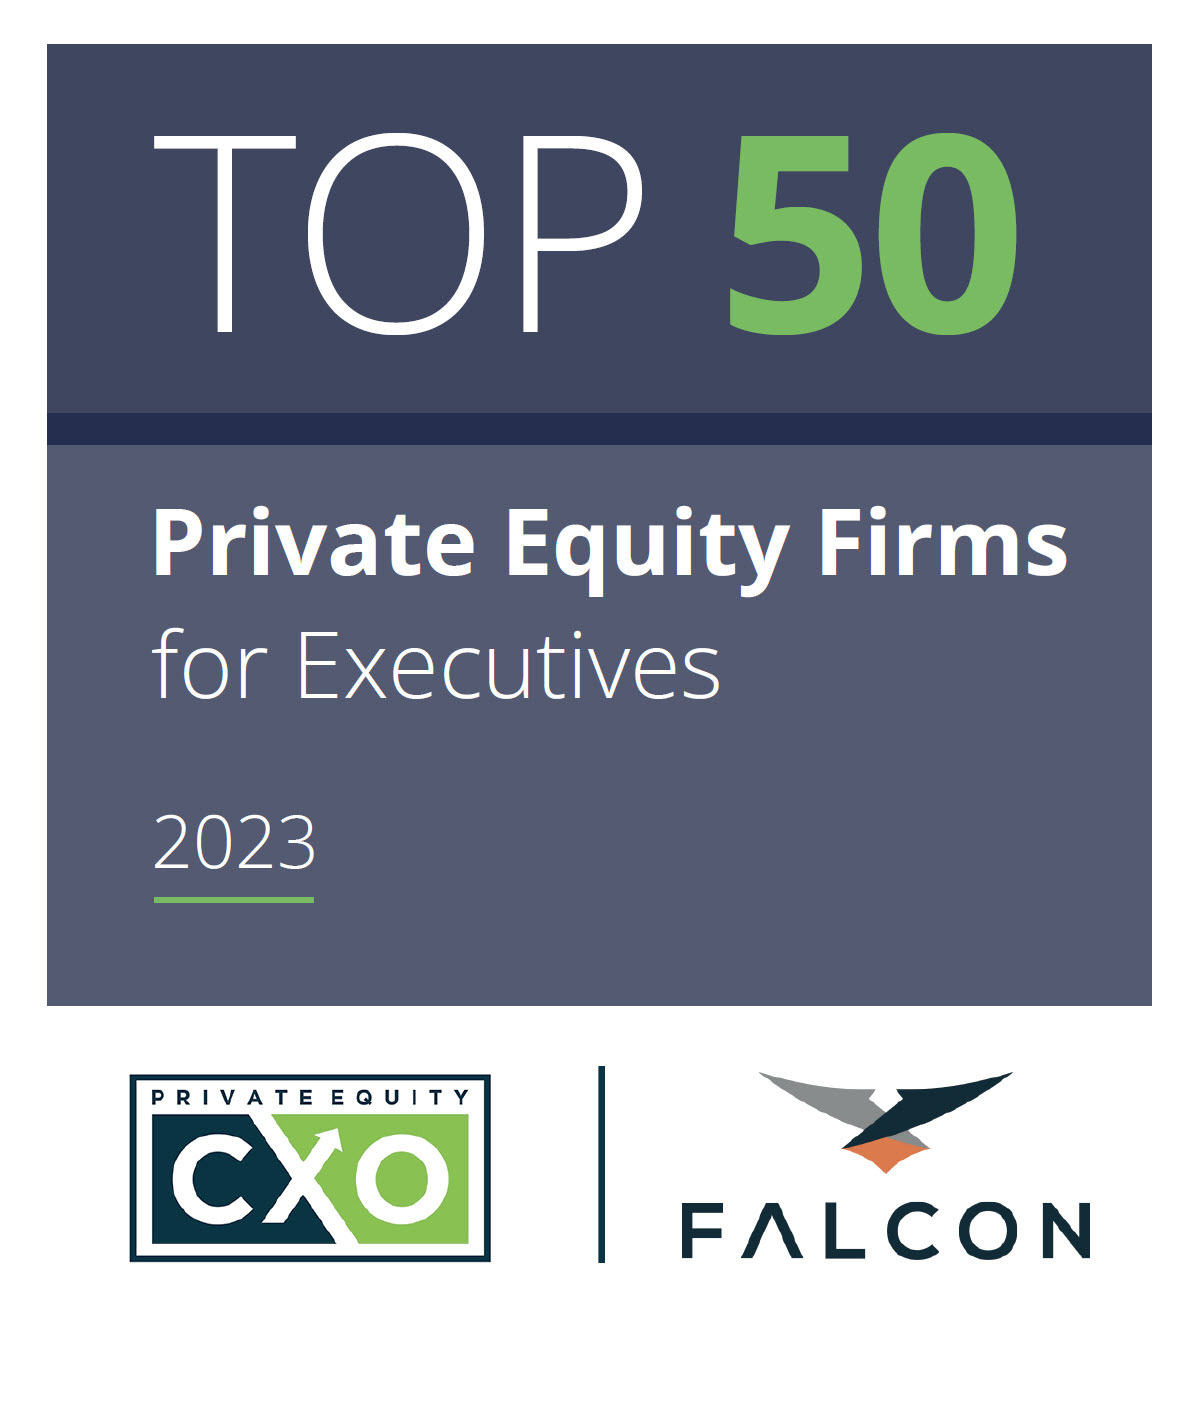 GenNx360 Capital Partners Honored as One of the Top 50 Private Equity Firms for Executives 